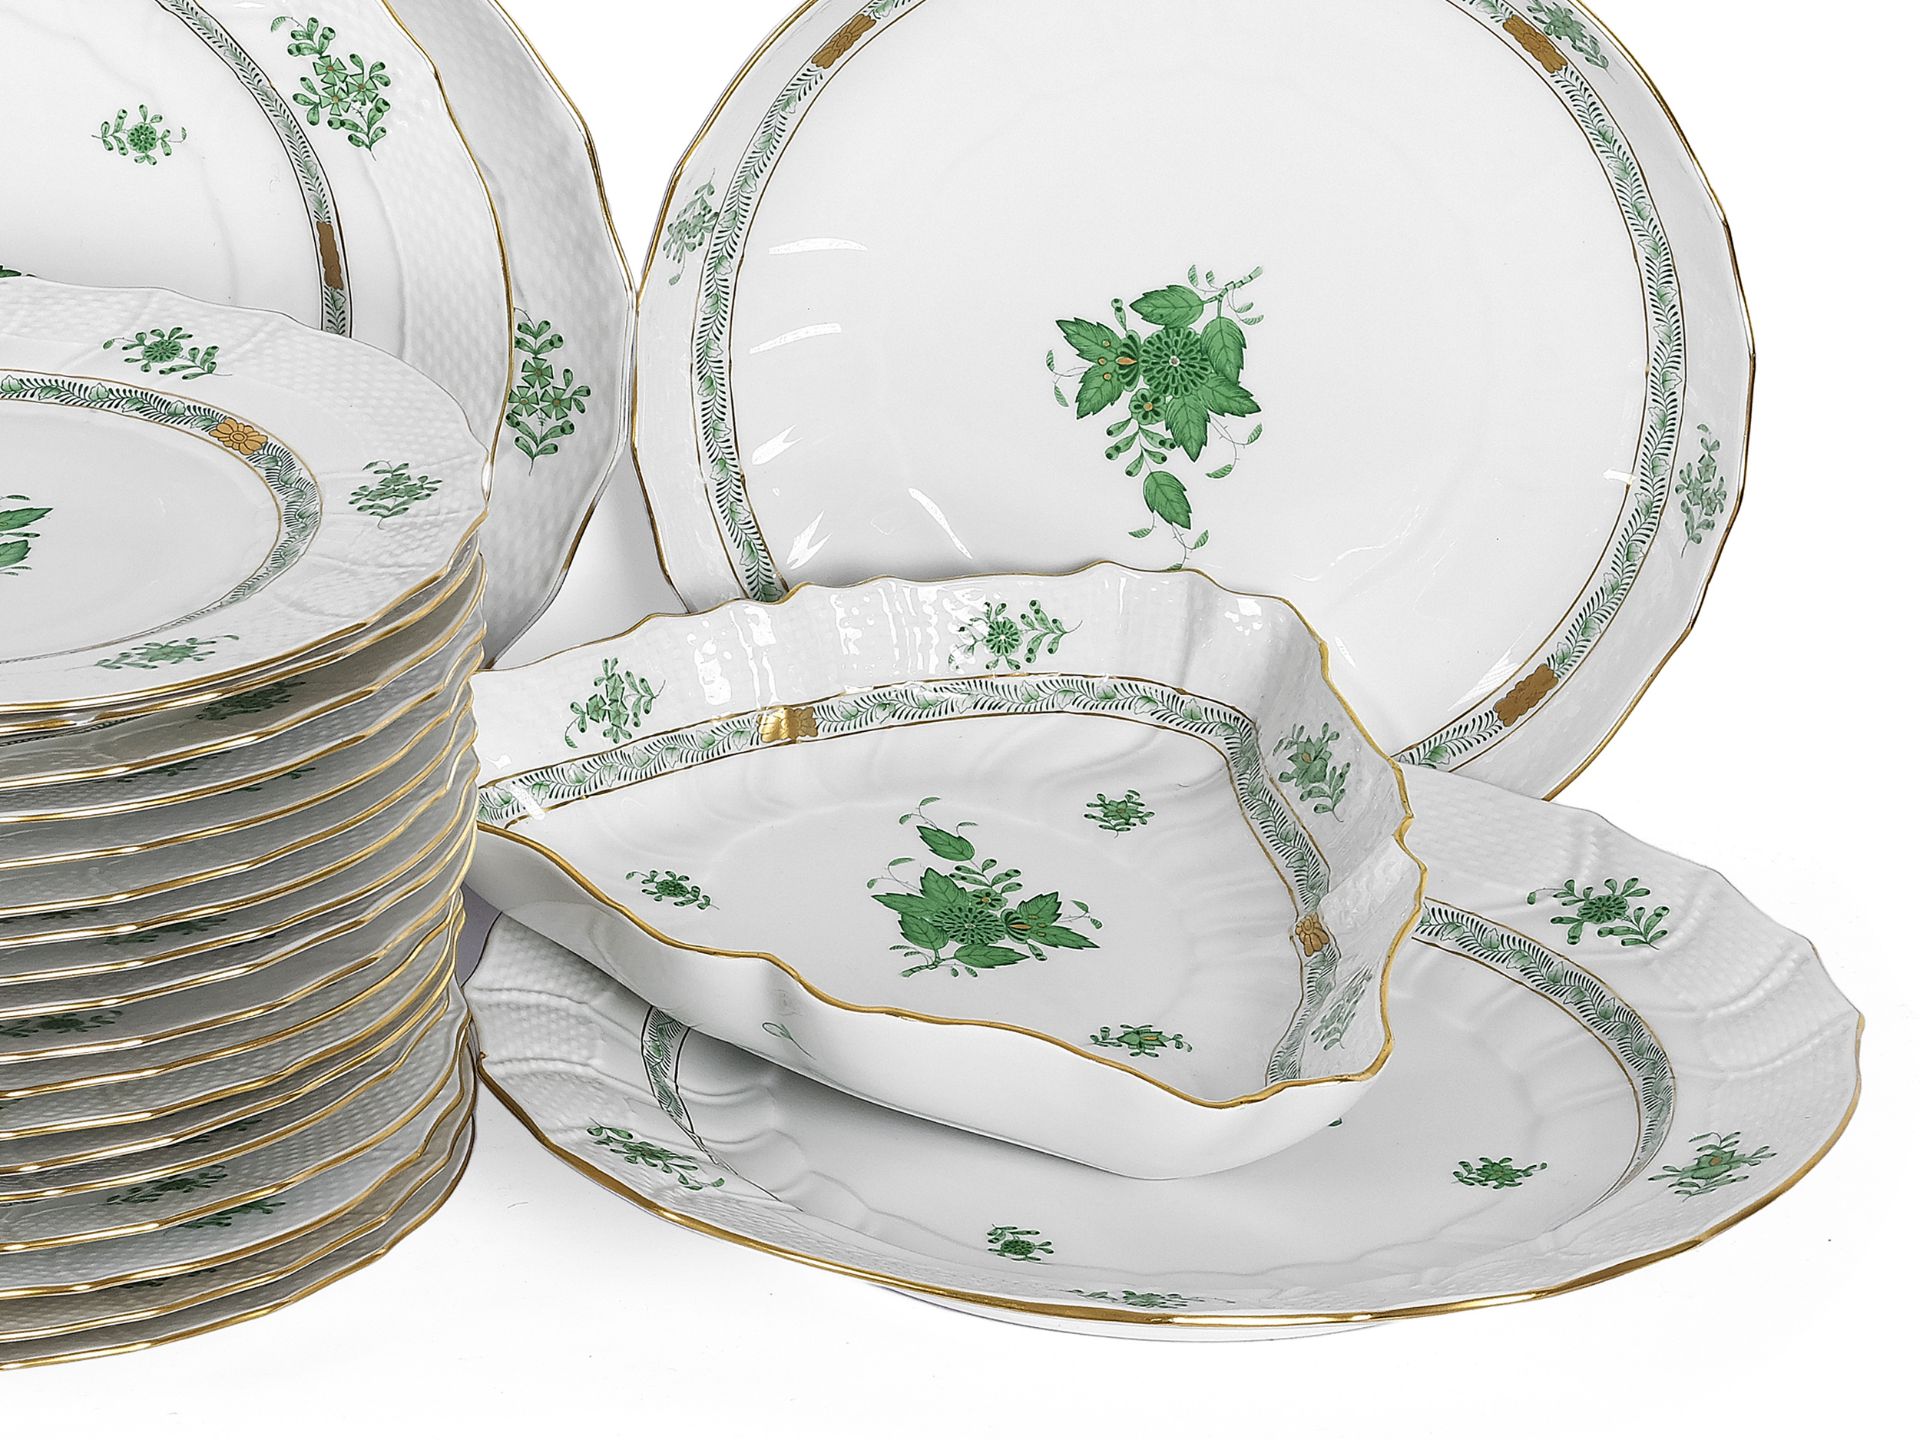 Large dinner service, 53 piece, Herend, Apponyi Vert - Image 4 of 6